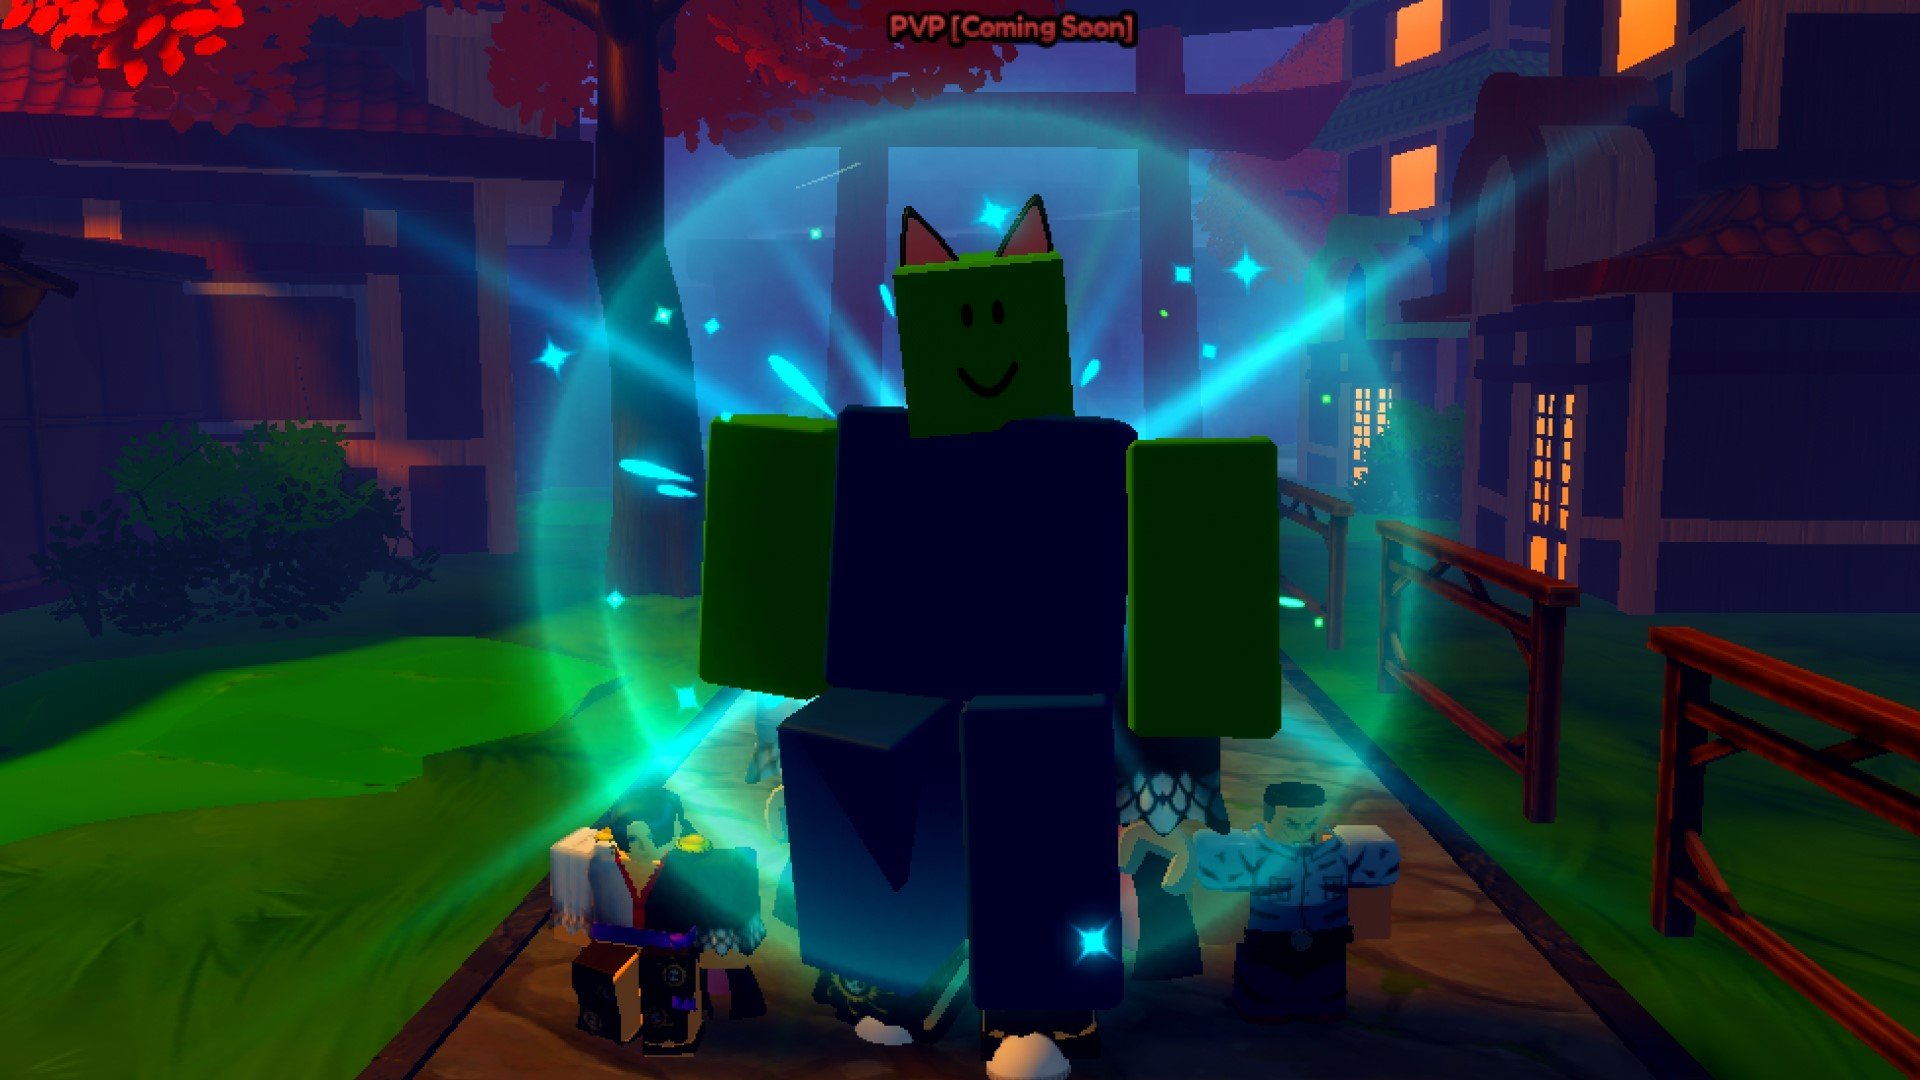 The Bobak Unit from Roblox game Anime Last Stand. It's surrounded by a glowing green aura, and there's a tranquil village scene in the background.